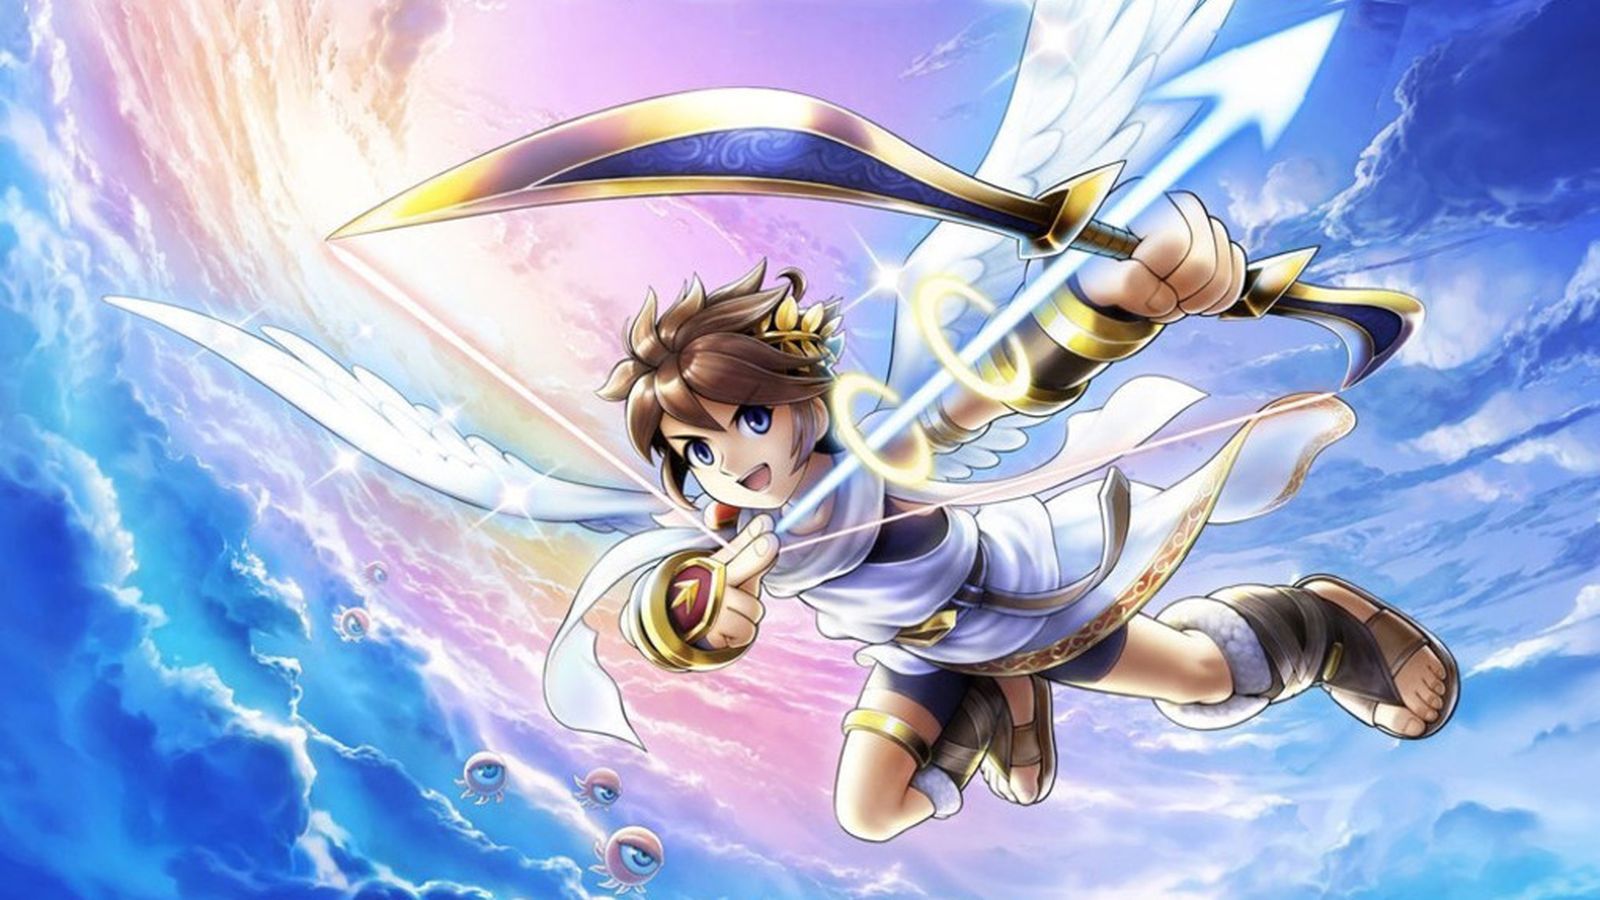 High Resolution Wallpaper | Kid Icarus 1600x900 px